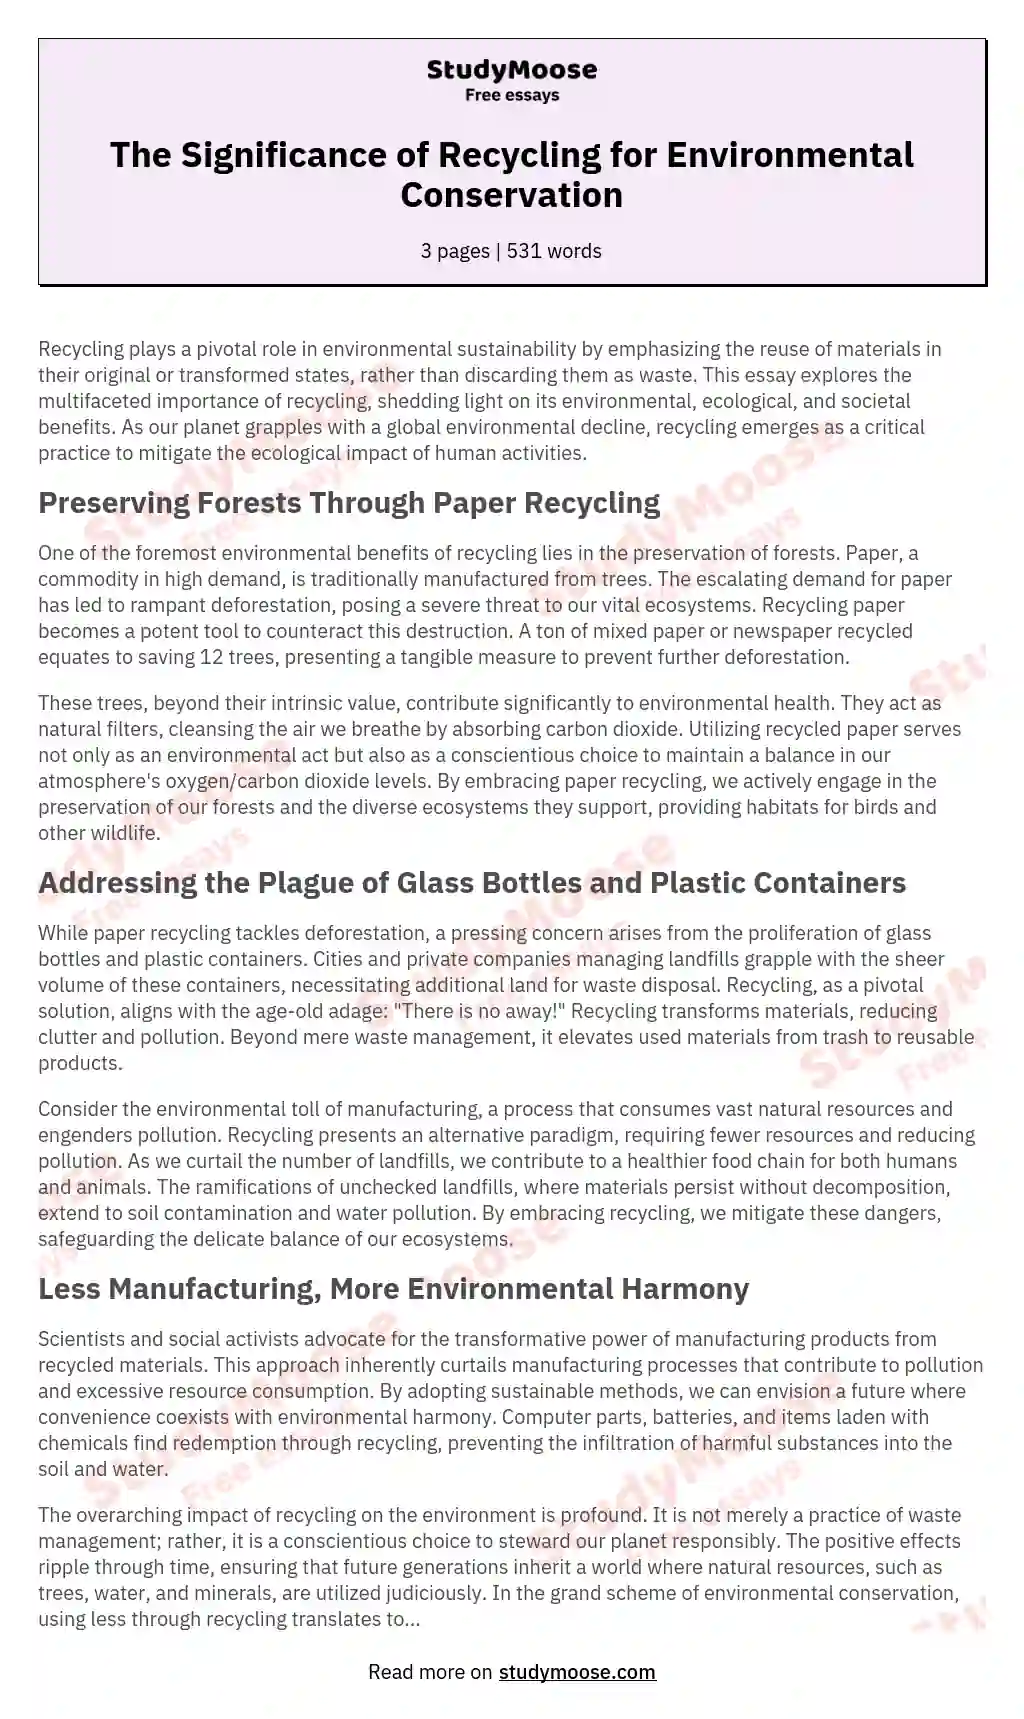 The Significance of Recycling for Environmental Conservation essay